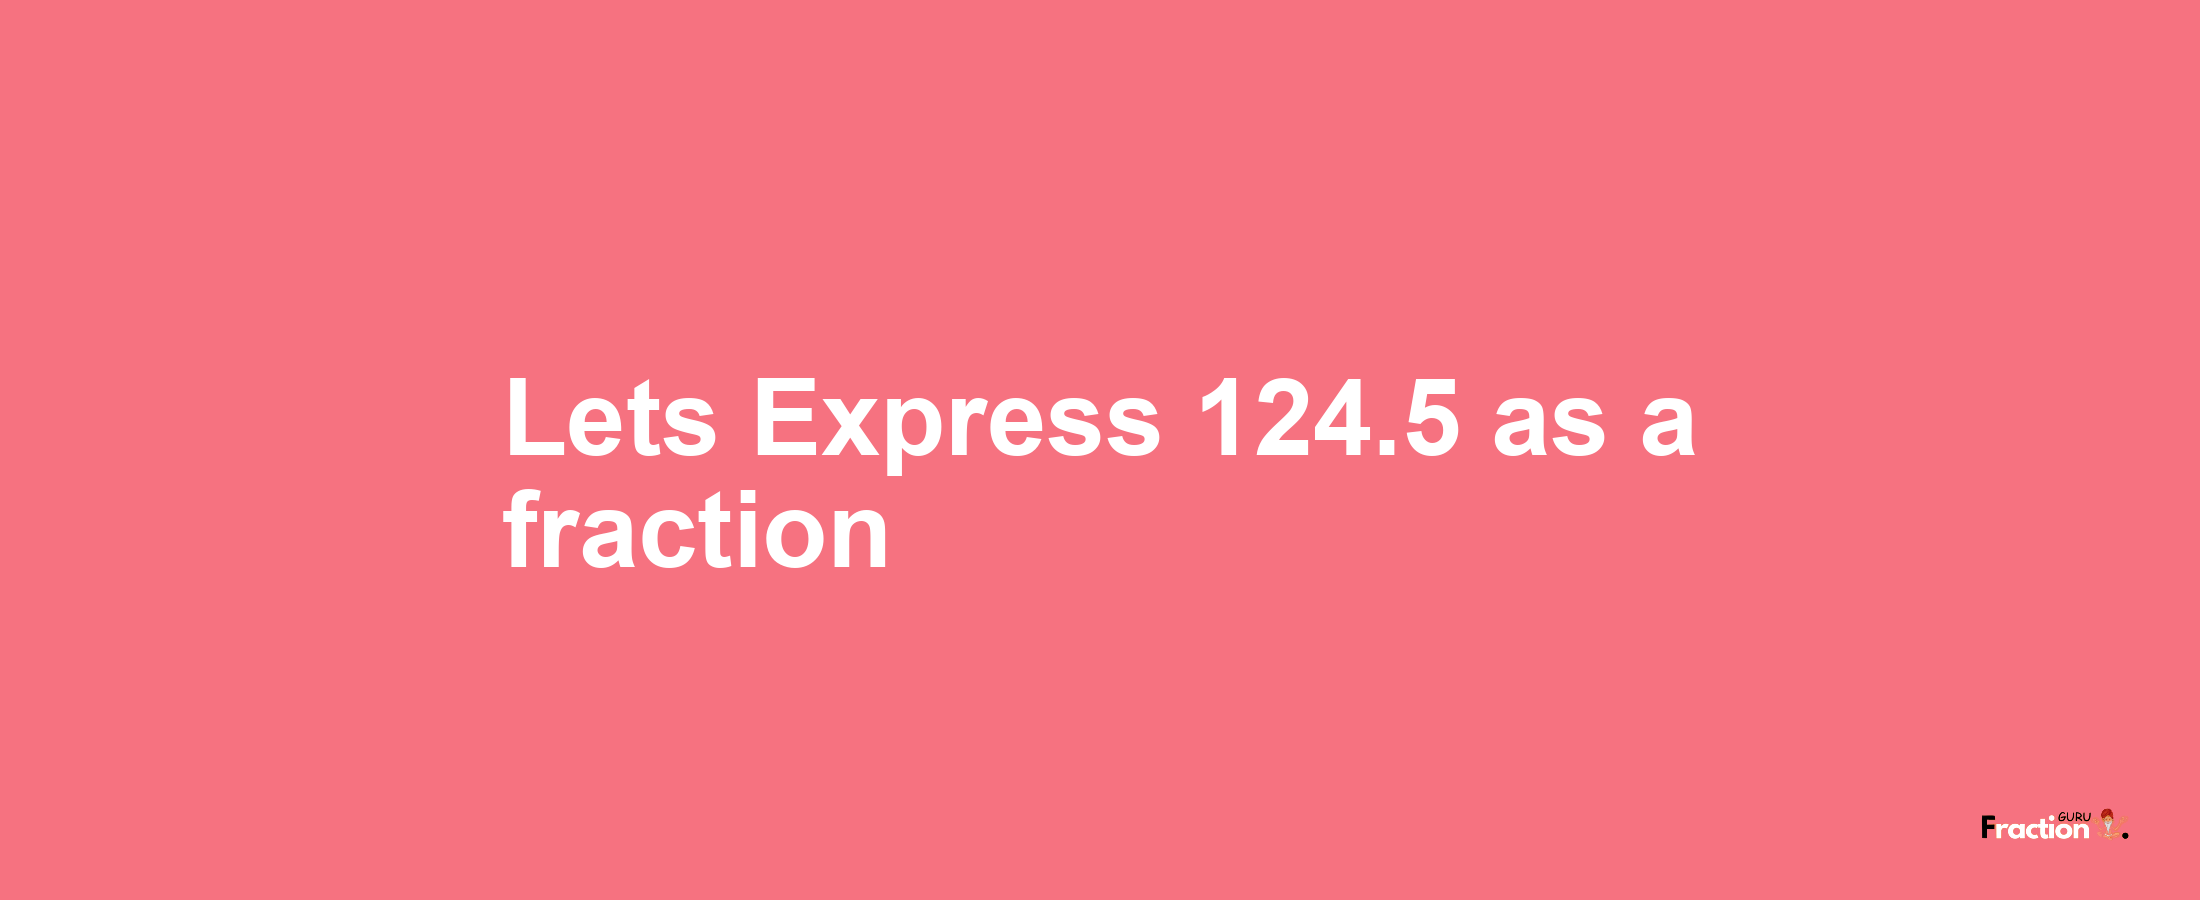 Lets Express 124.5 as afraction